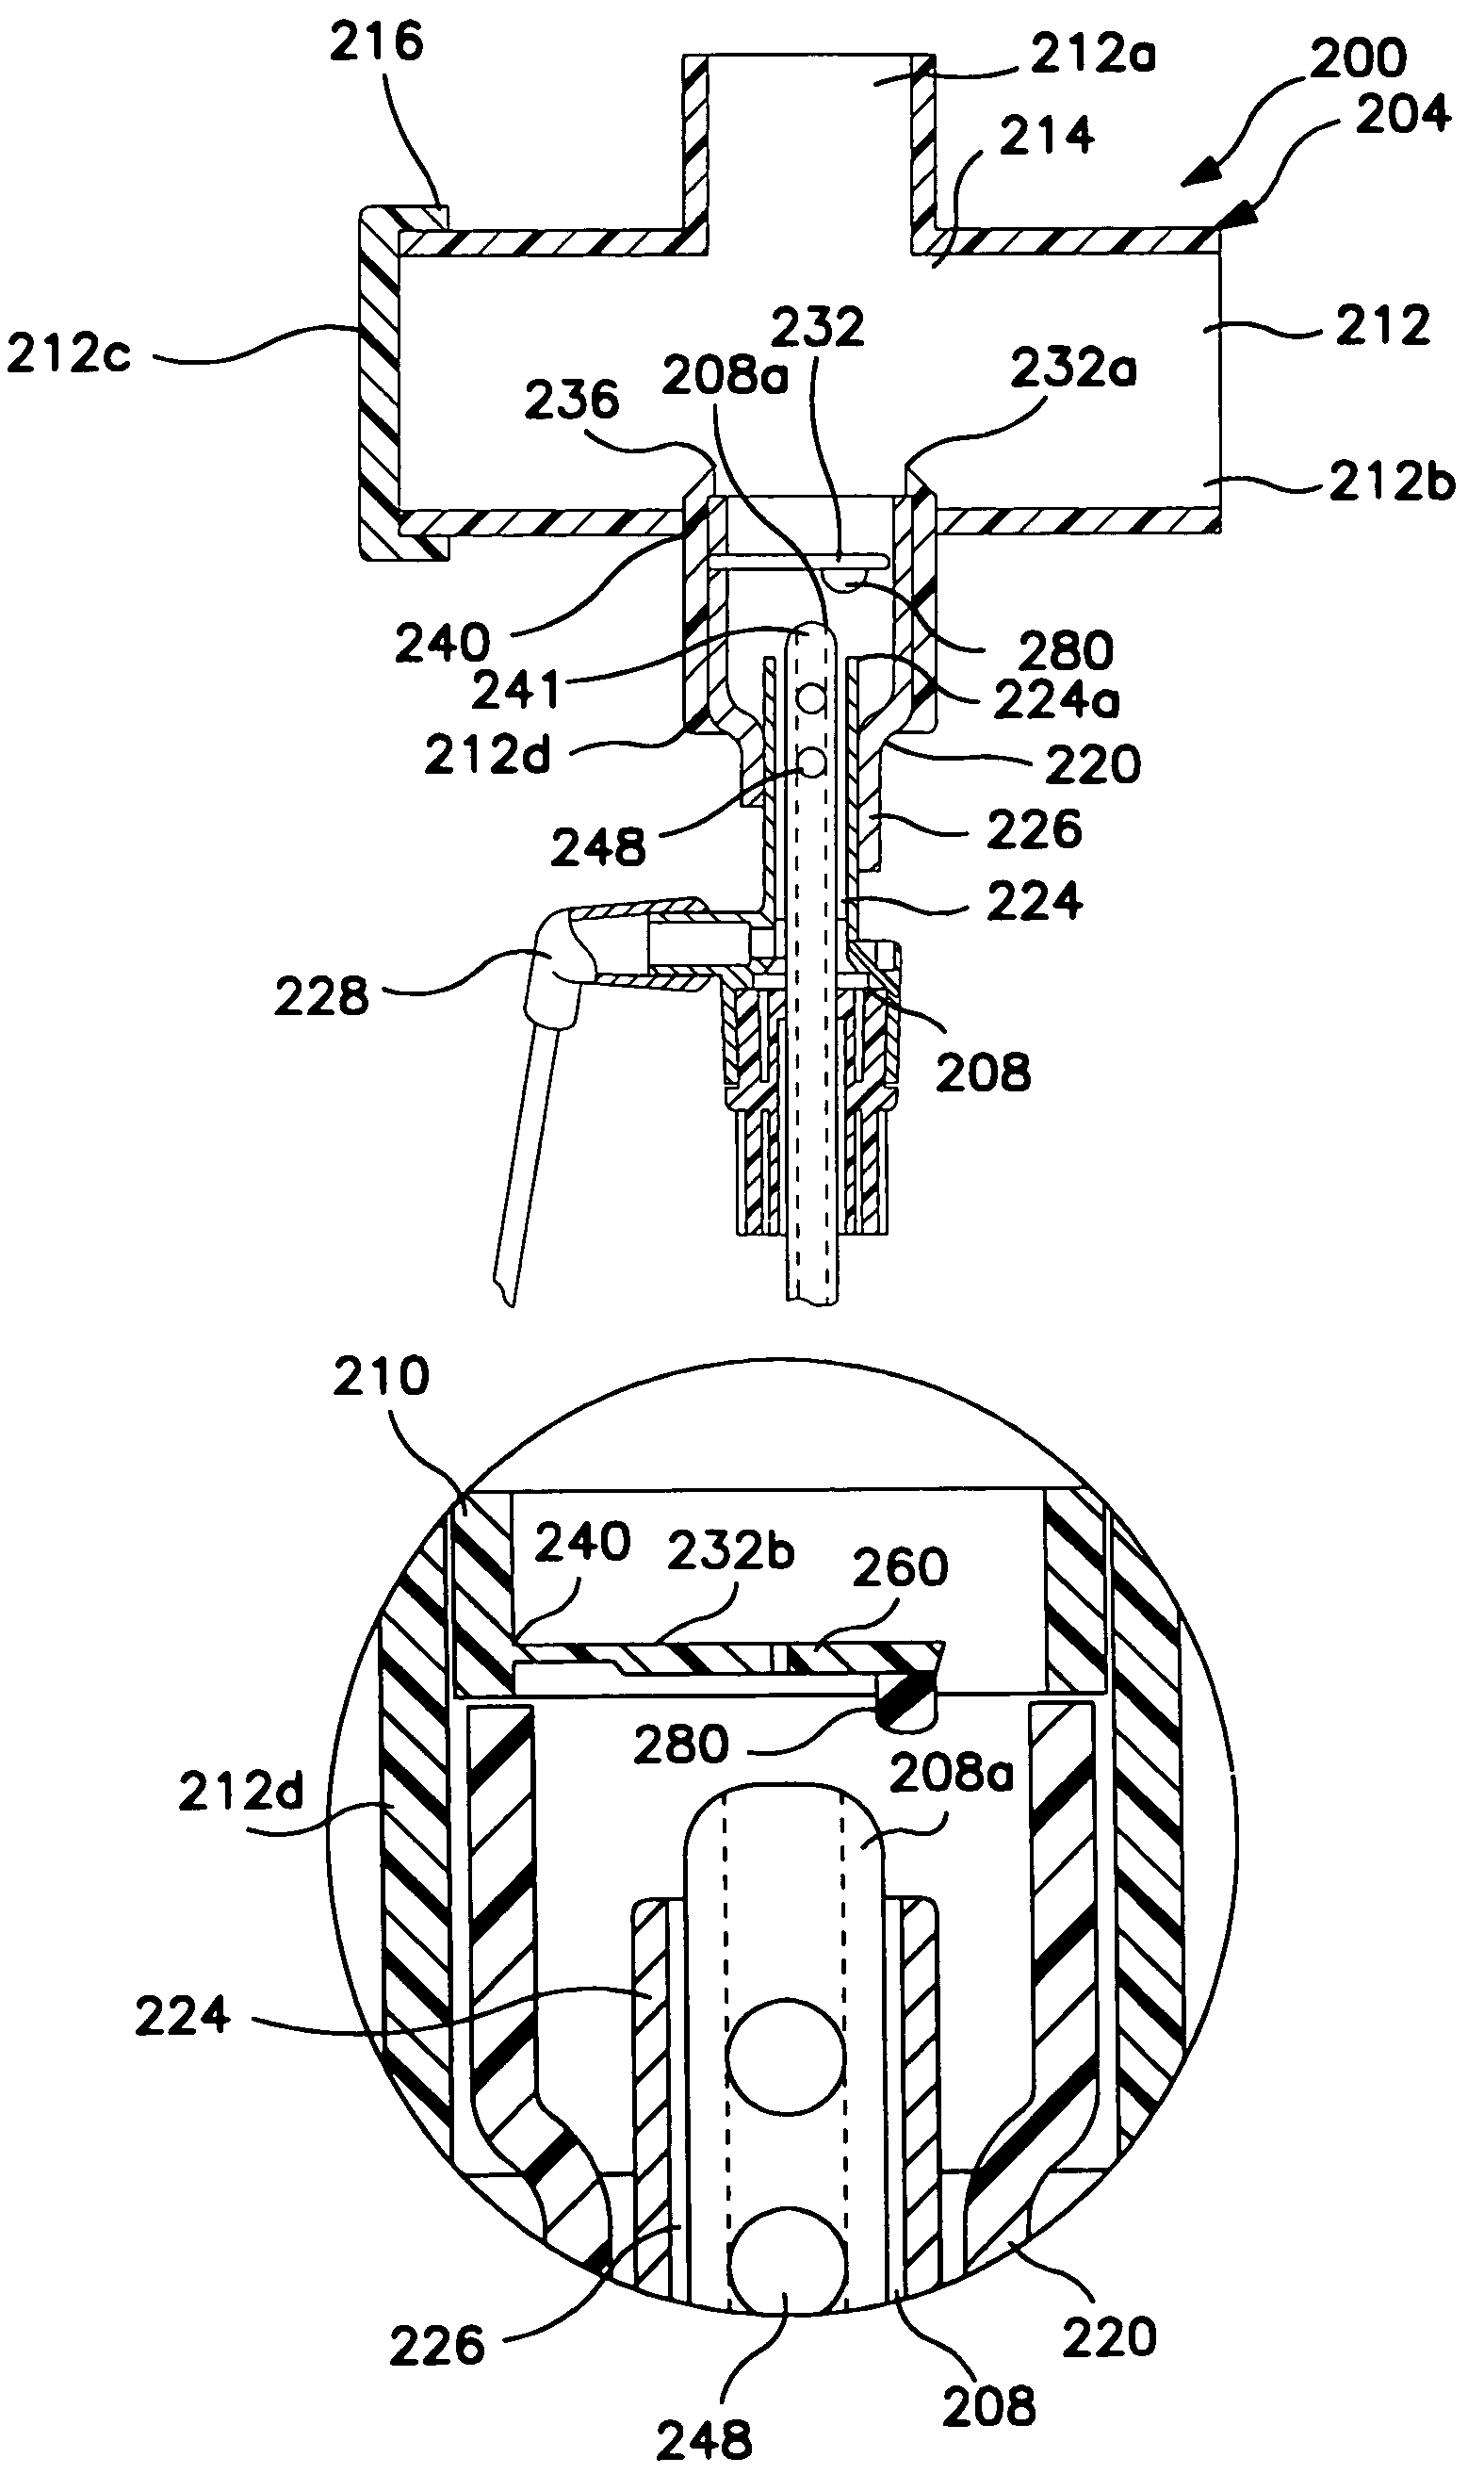 Endotracheal catheter and manifold assembly with improved valve